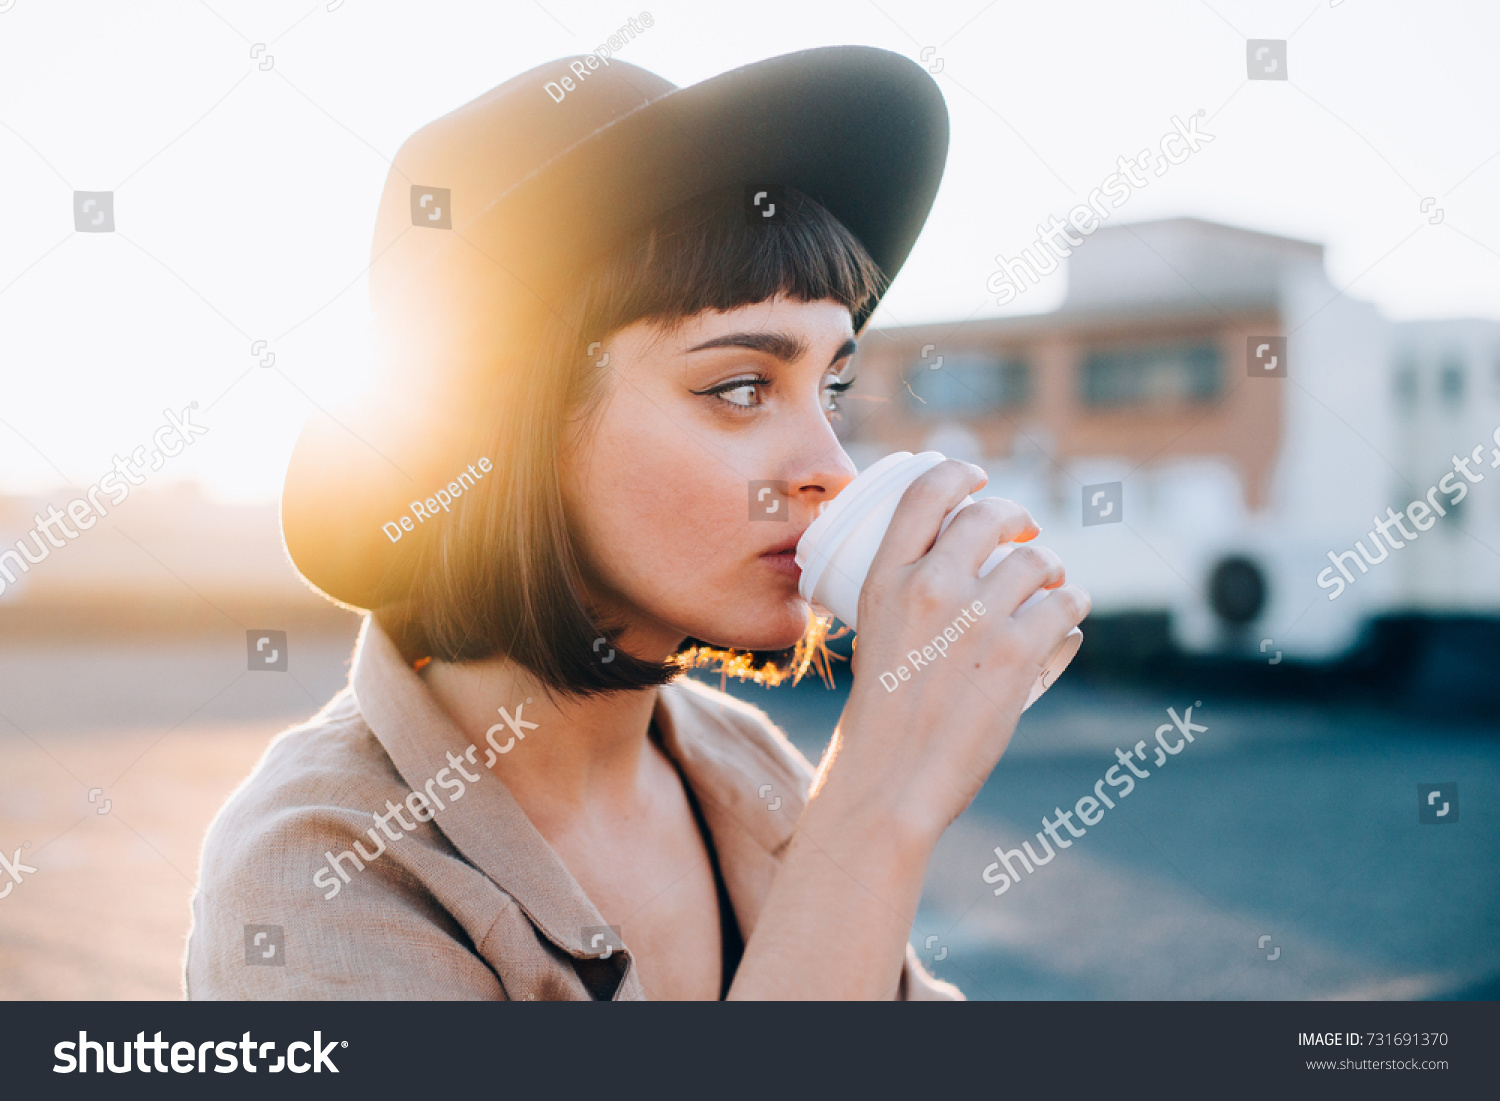 Attractive adorable woman with natural makeup sips on coffee in early morning on sunrise or sunset with light leaks, from to go cup, wears hipster fedora hat #731691370